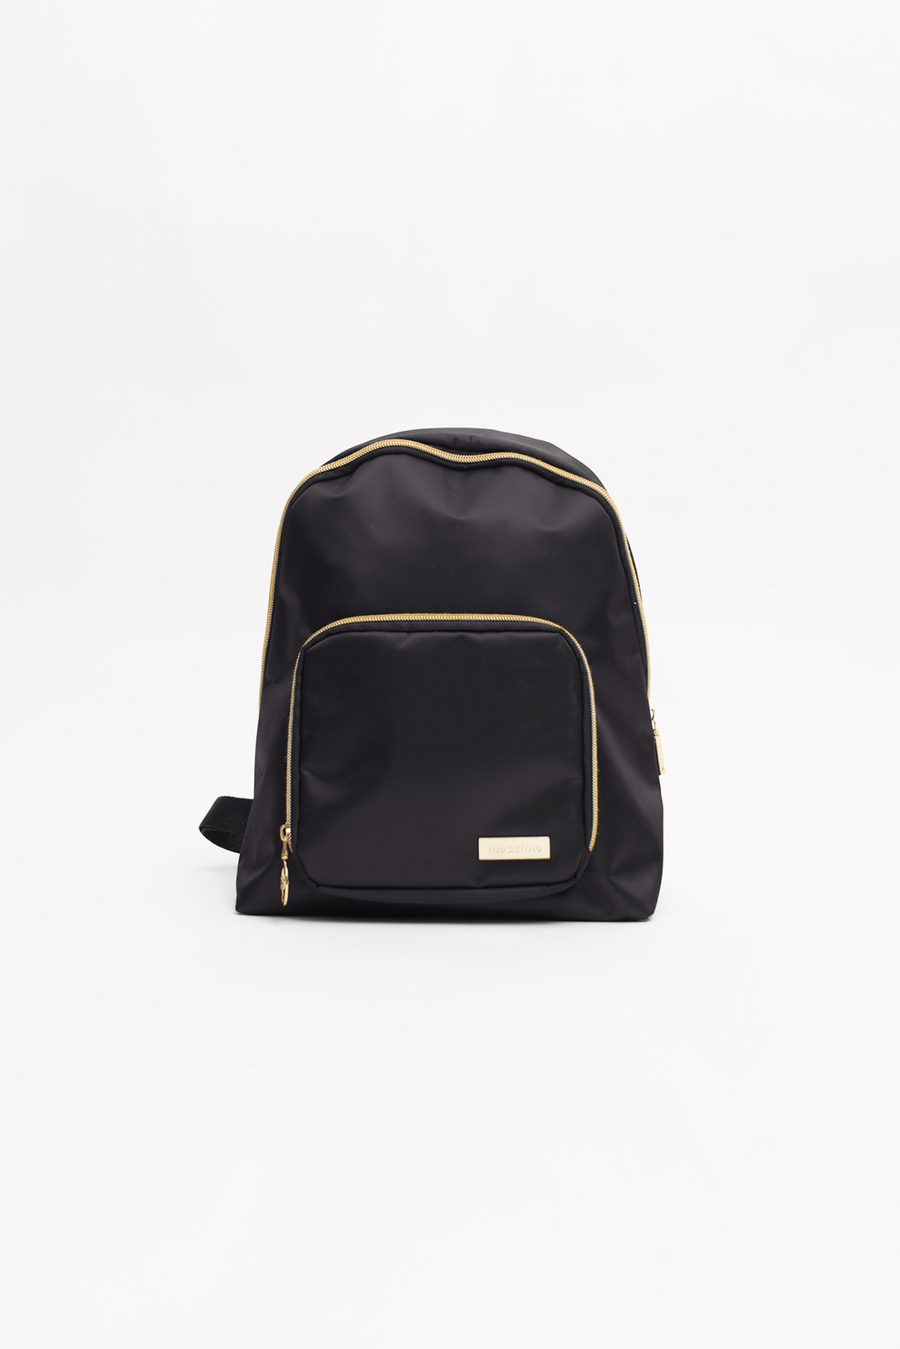 Black Small Backpack - Mossimo PH